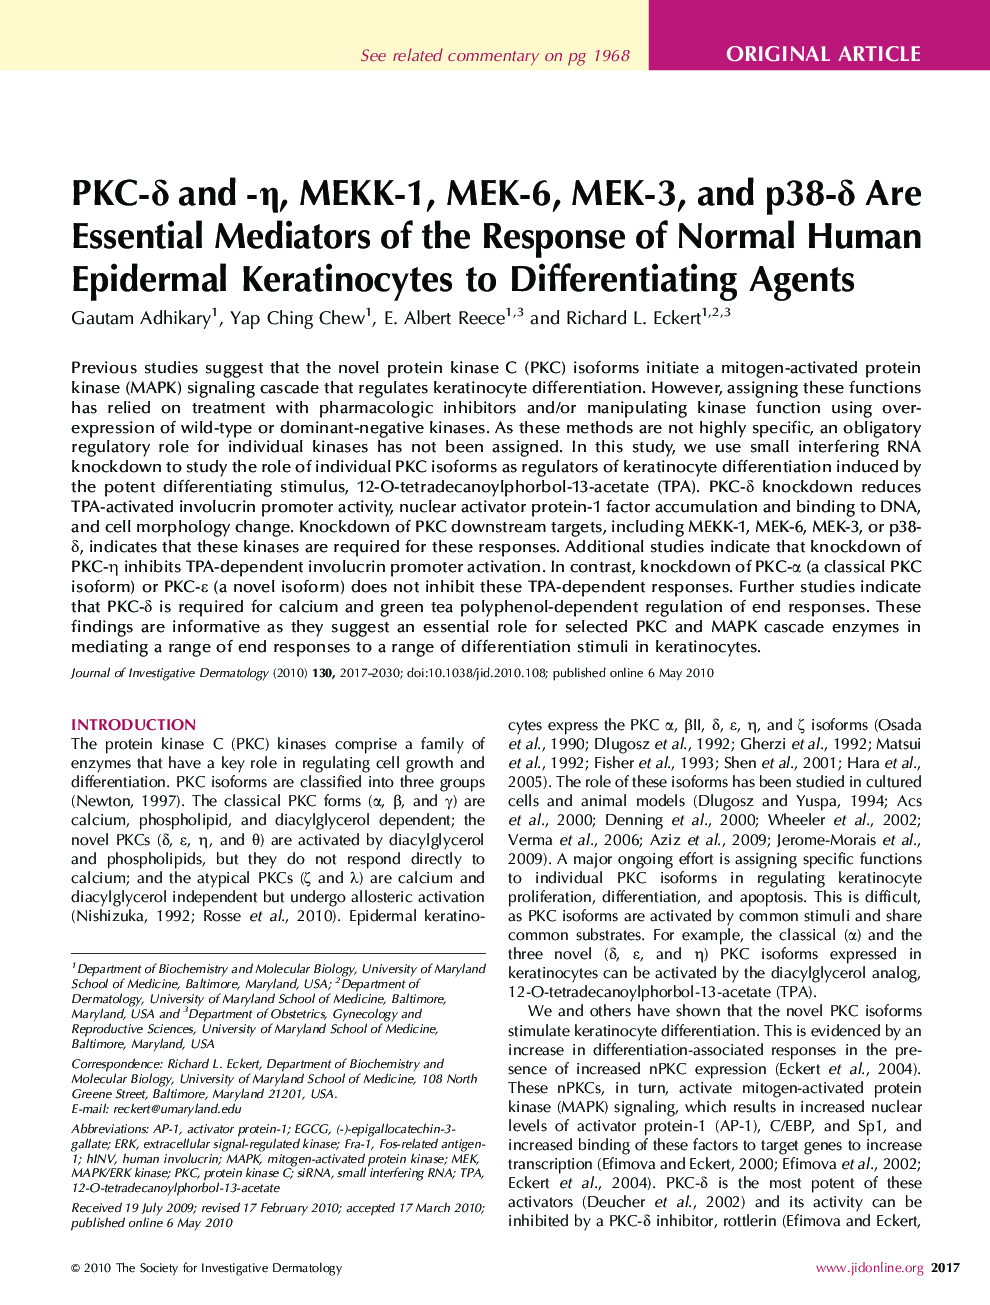 PKC-δ and -η, MEKK-1, MEK-6, MEK-3, and p38-δ Are Essential Mediators of the Response of Normal Human Epidermal Keratinocytes to Differentiating Agents 